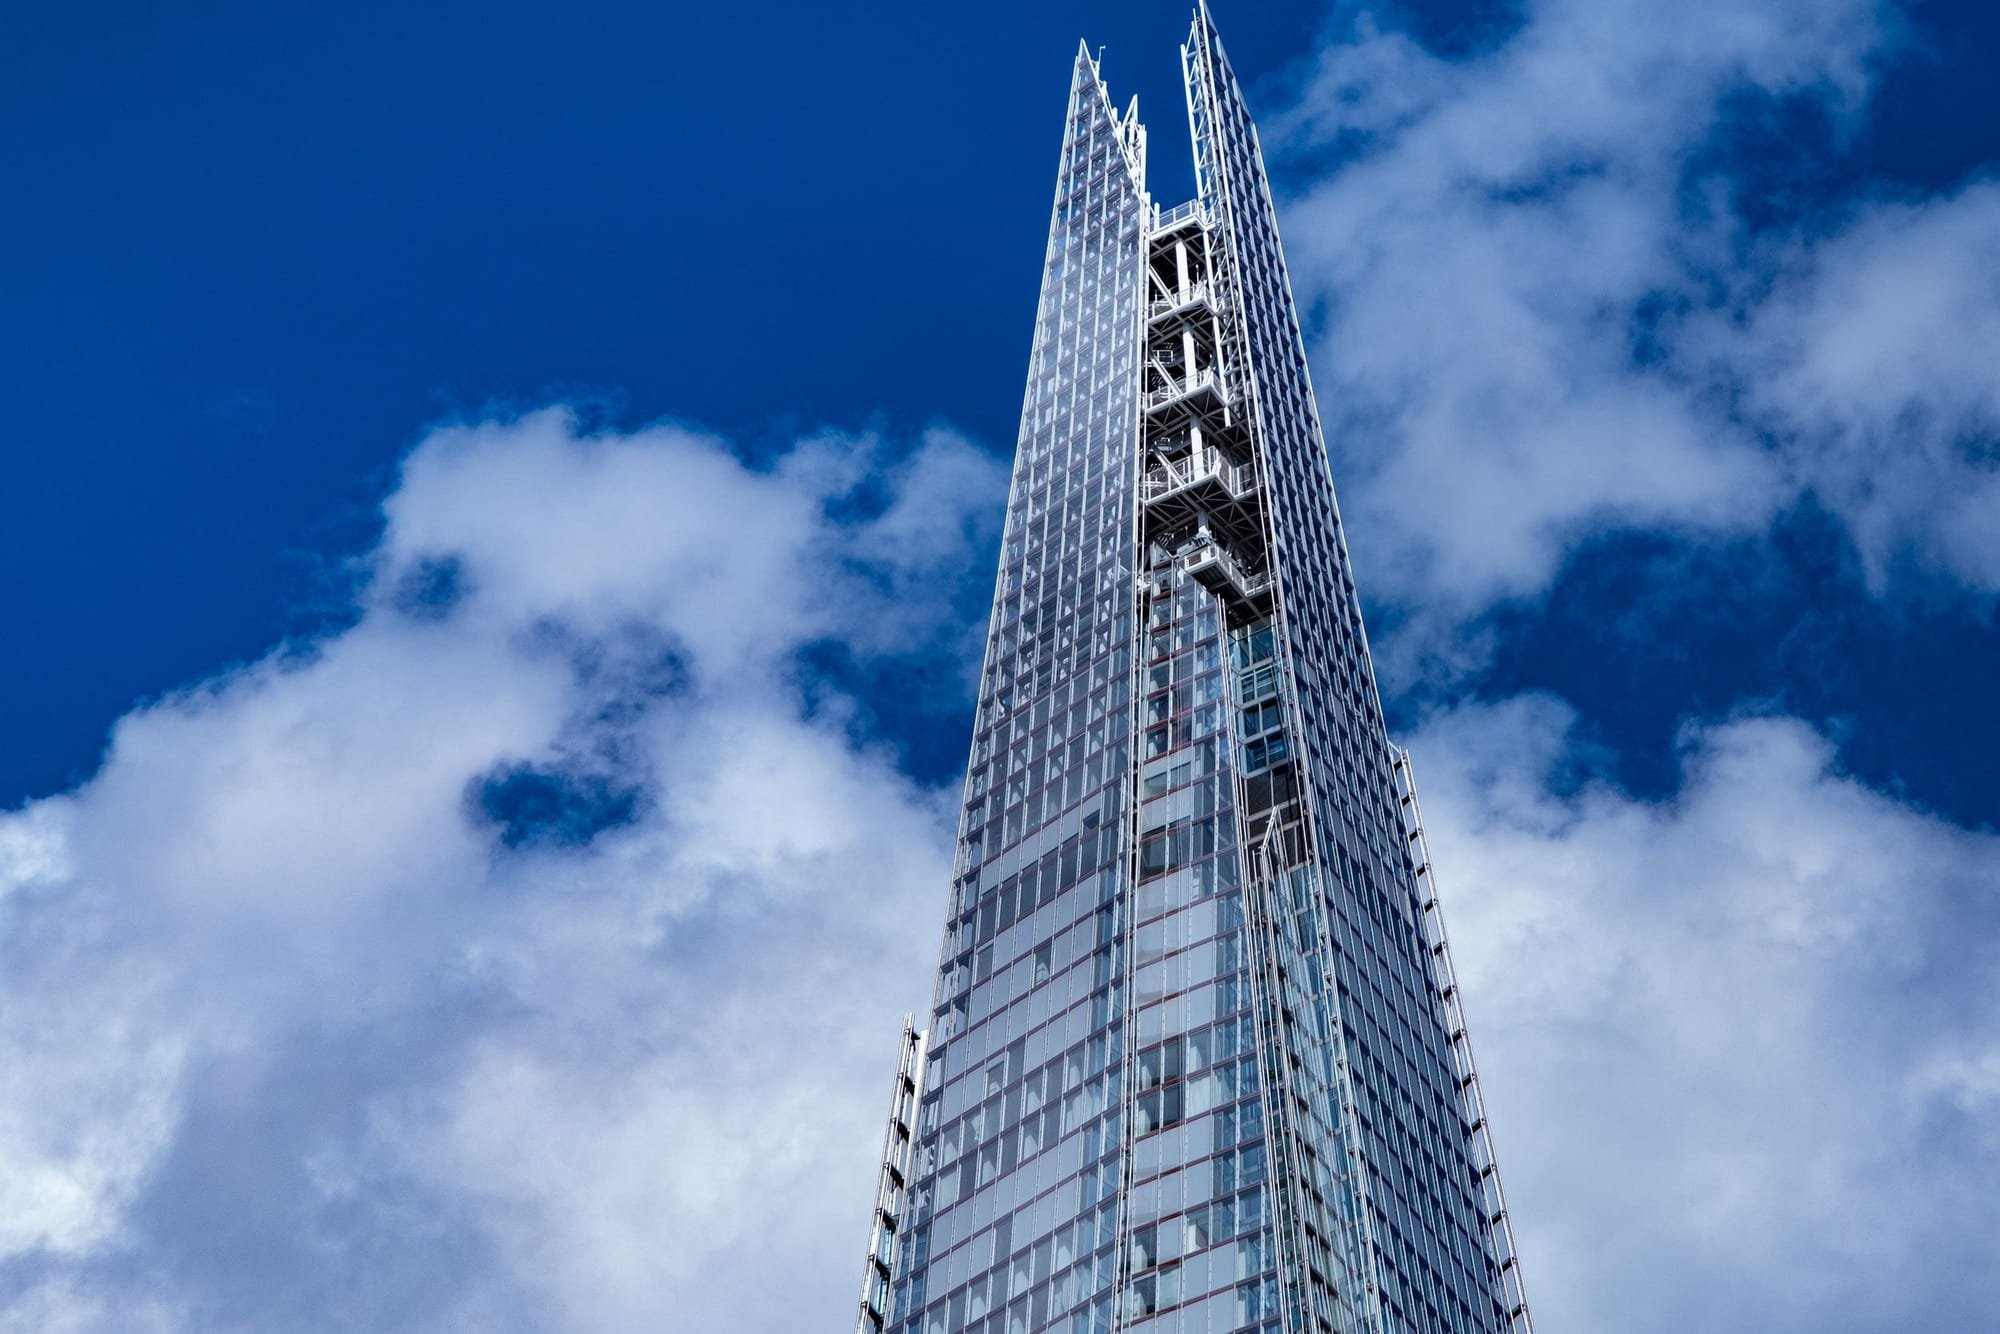 The Shard Viewing Gallery